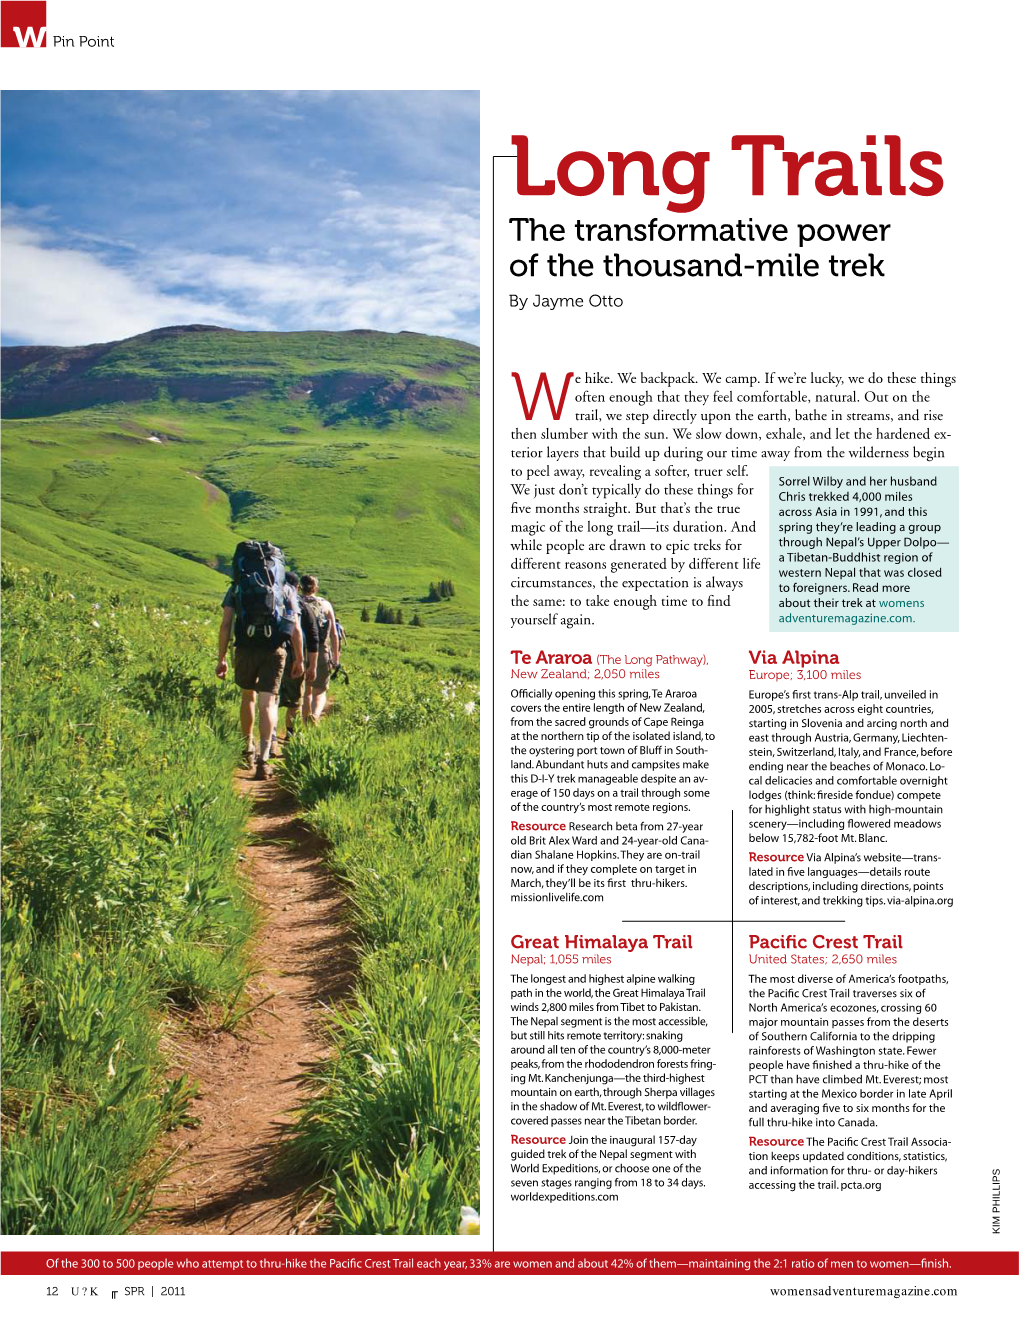 Long Trails YOUR TEAM the Transformative Power IS READY